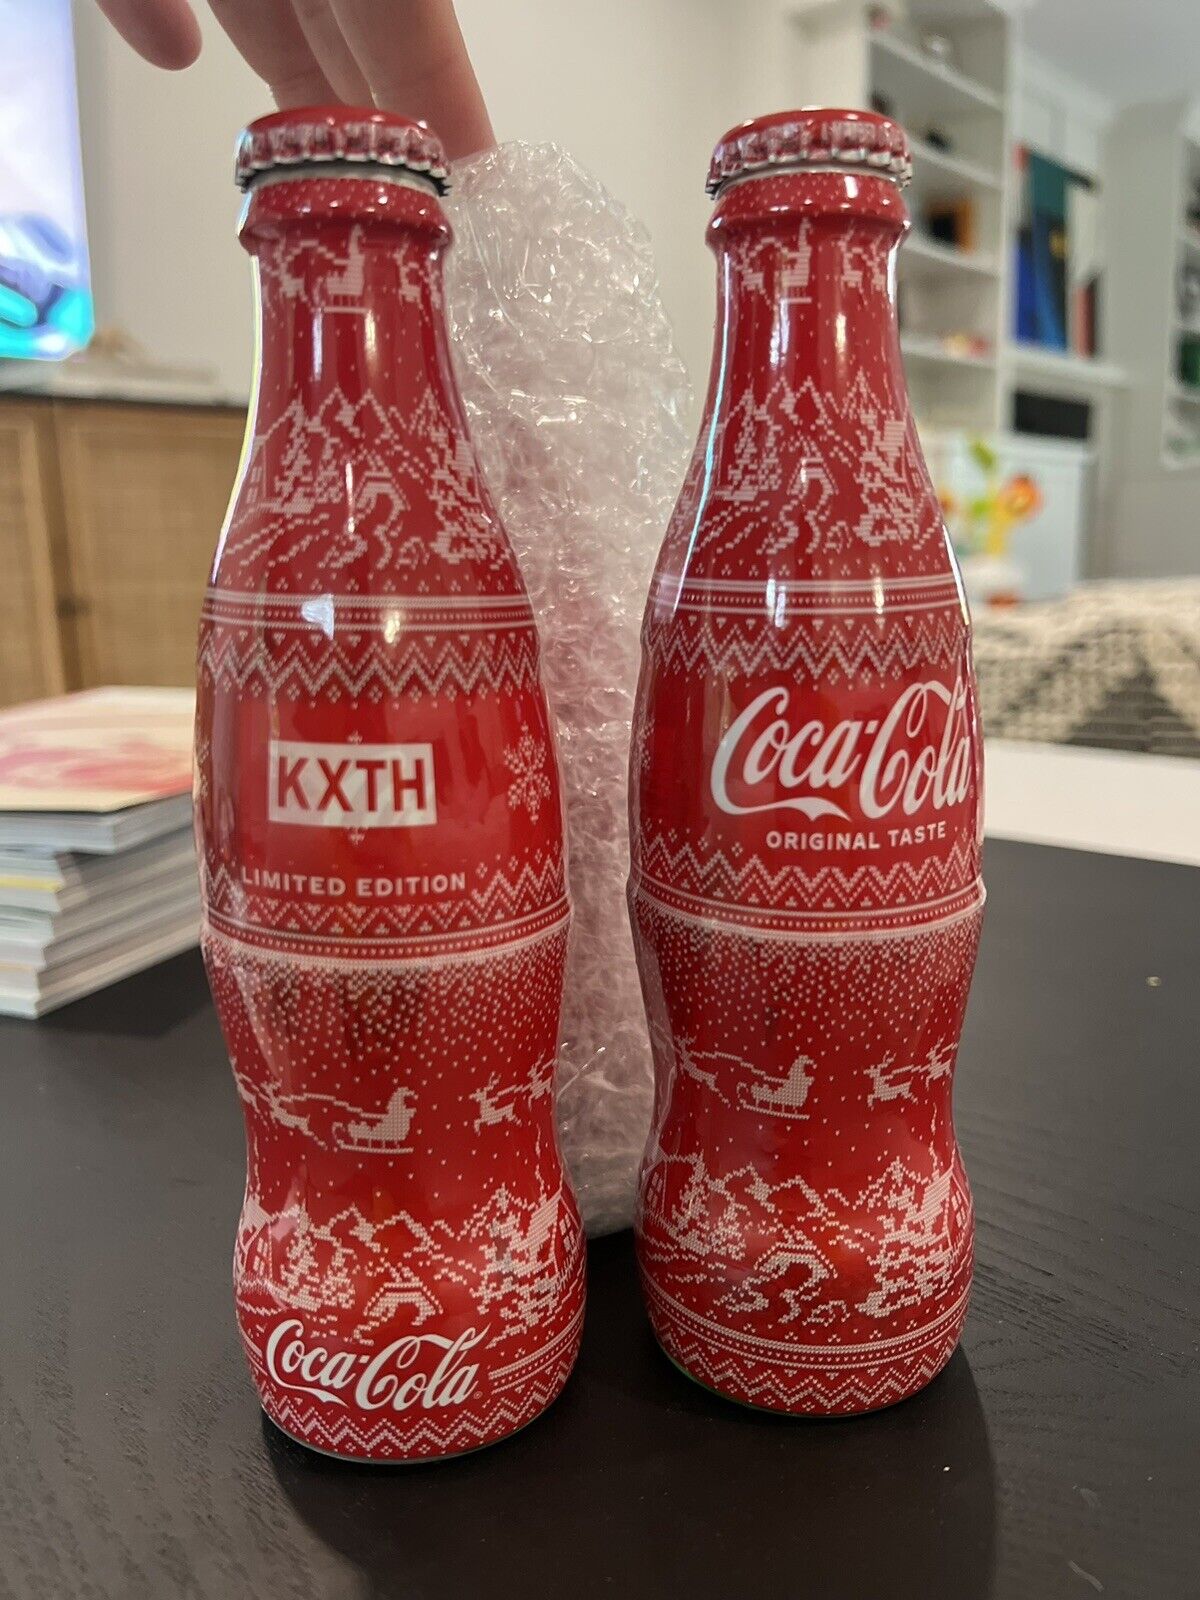 Kith Coca Cola Holiday Red Bottle Brand New Sealed Limited Edition 2021 Kithmas